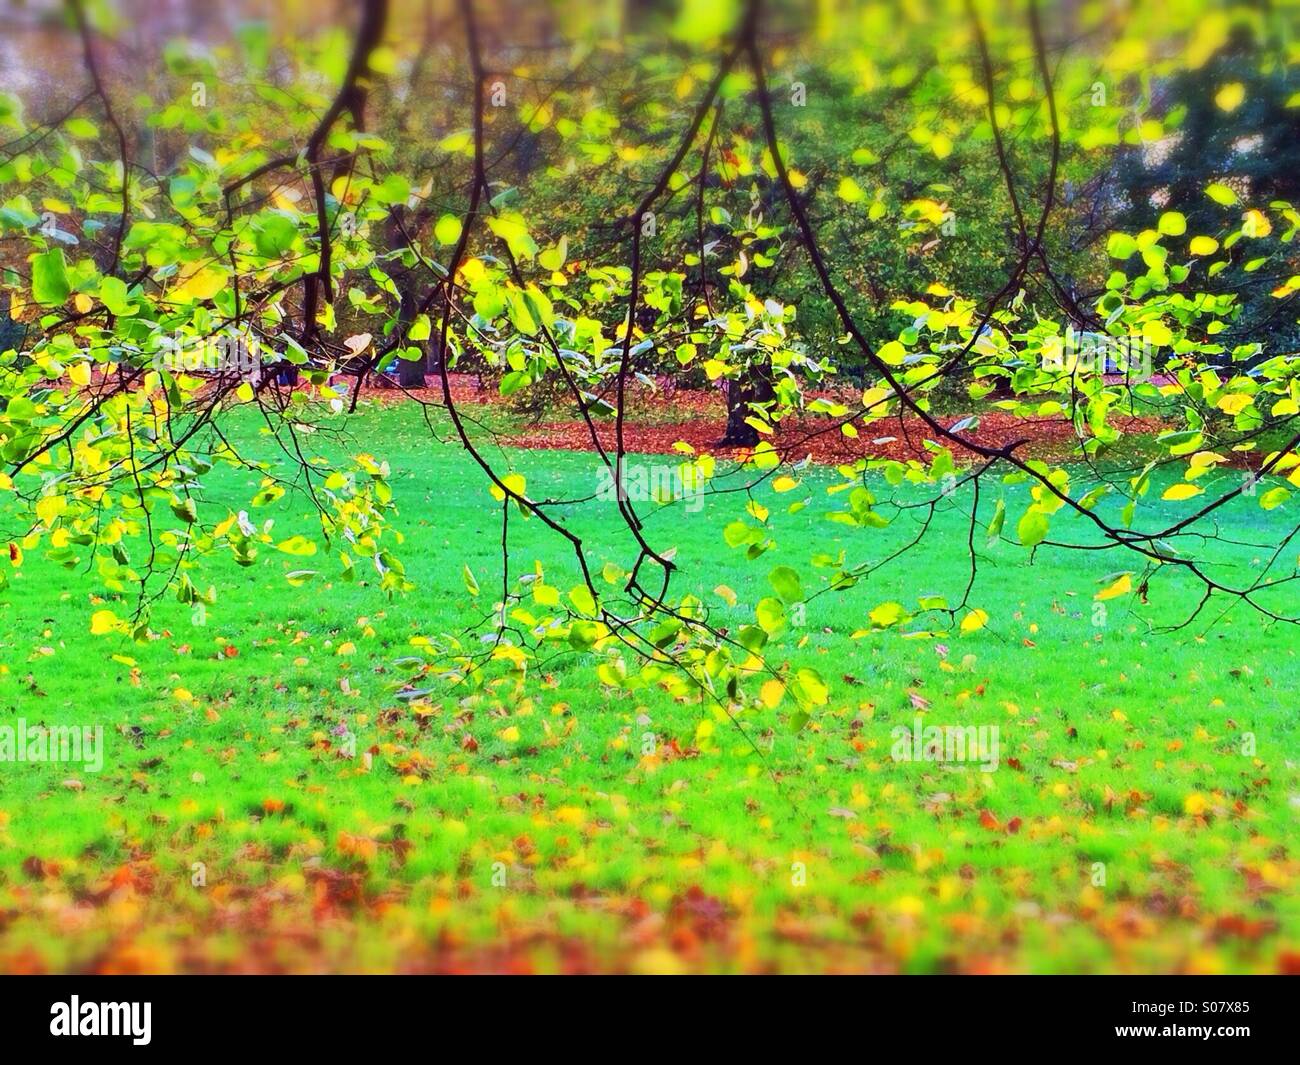 Green leaves tree branches Stock Photo